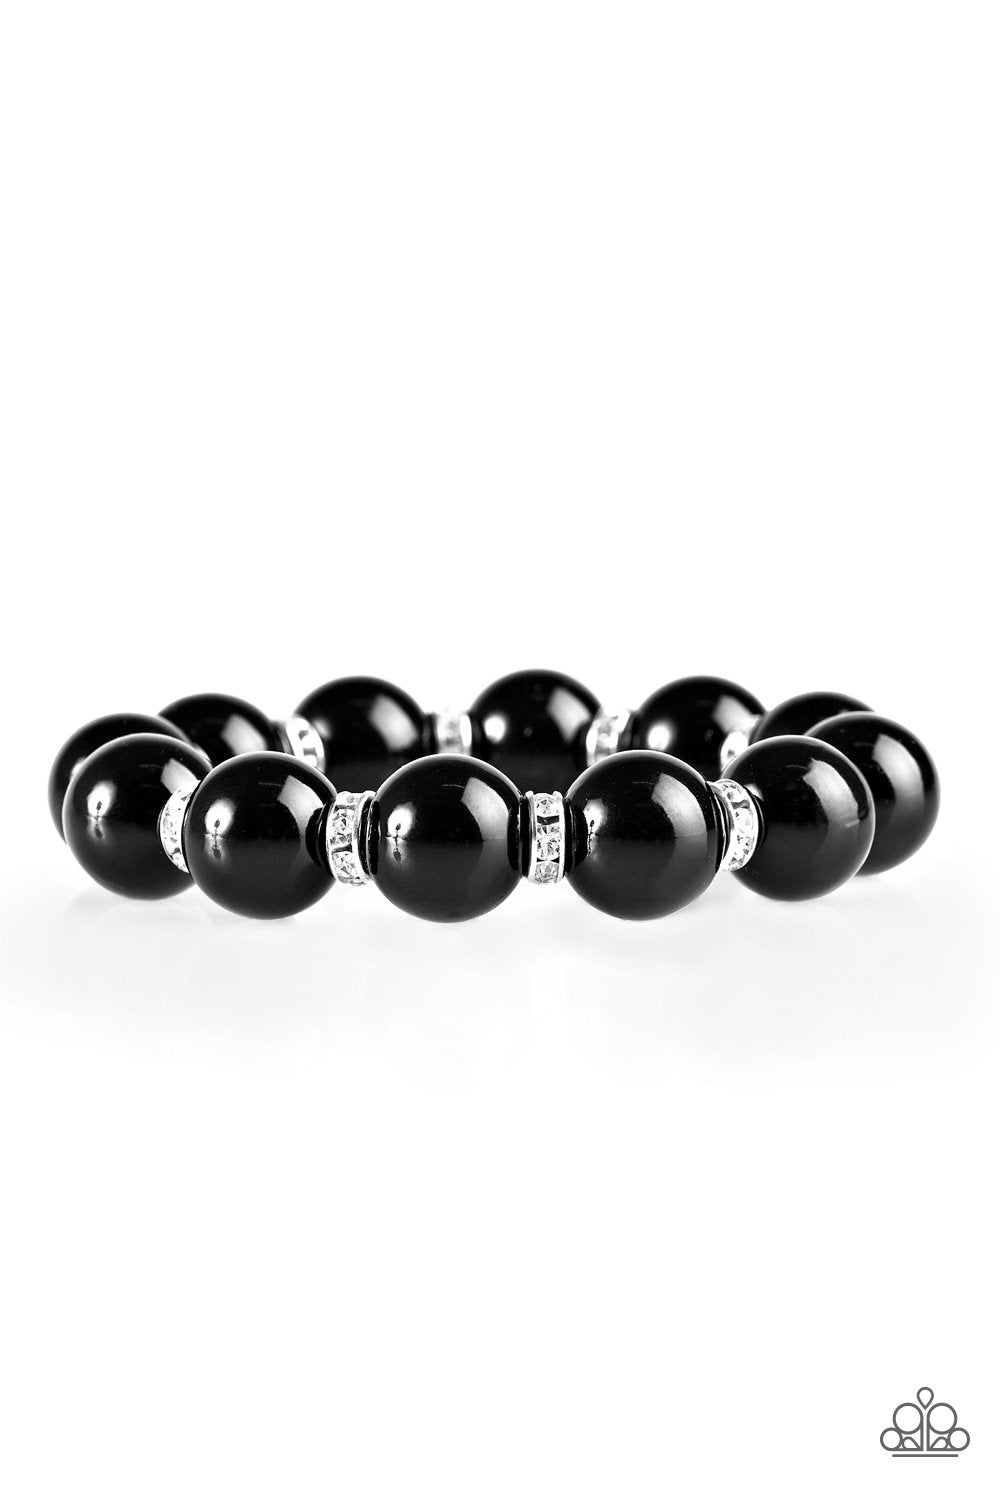 Here Comes The Bridesmaid Black Stretch Bracelet - Paparazzi Accessories-CarasShop.com - $5 Jewelry by Cara Jewels